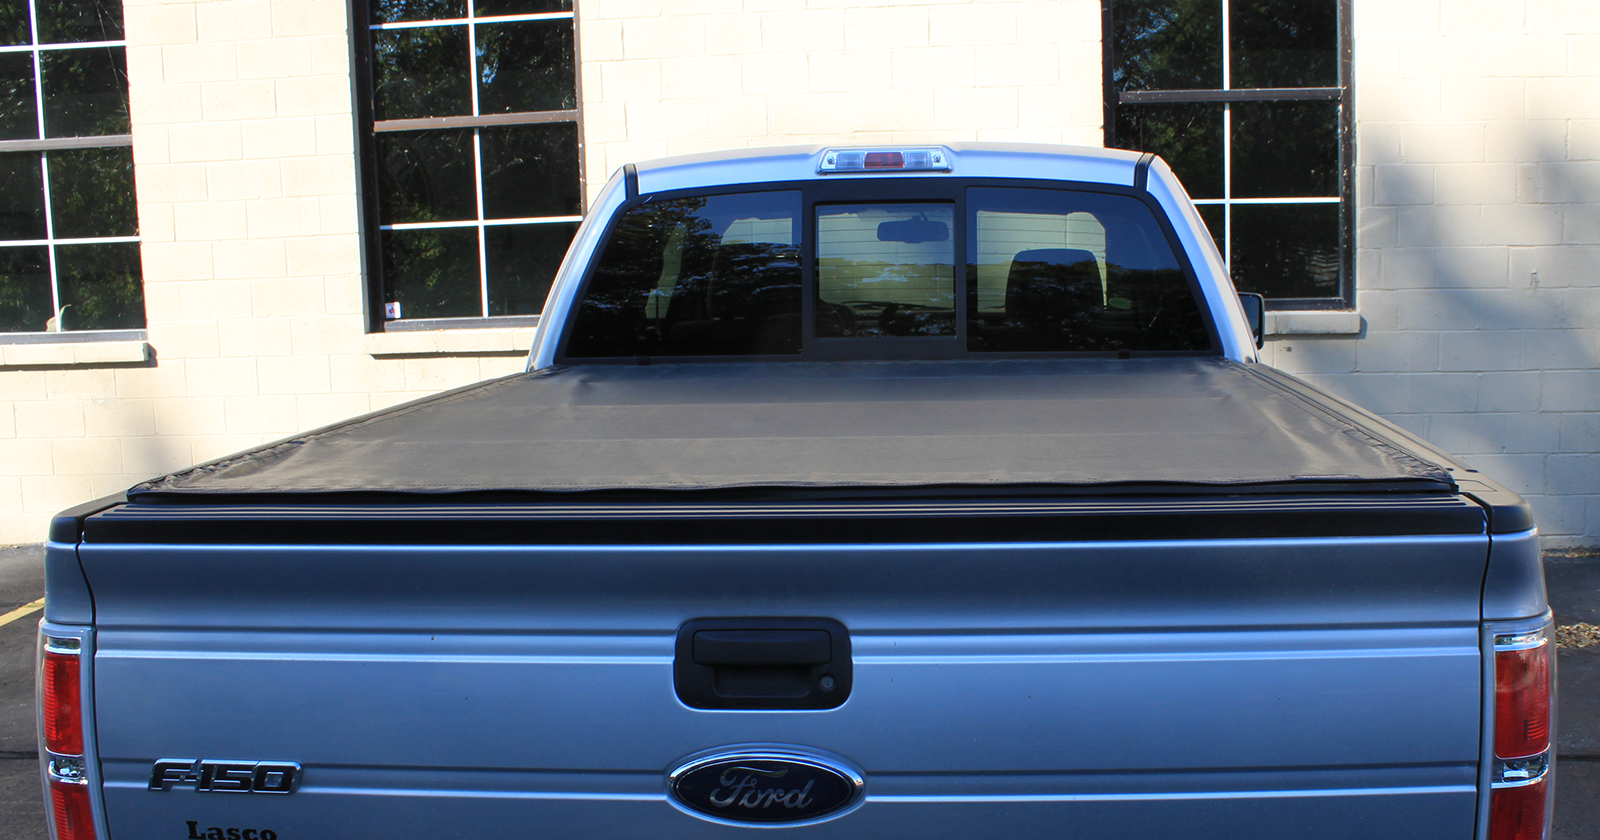 Truck Bed Cover on Blue Truck